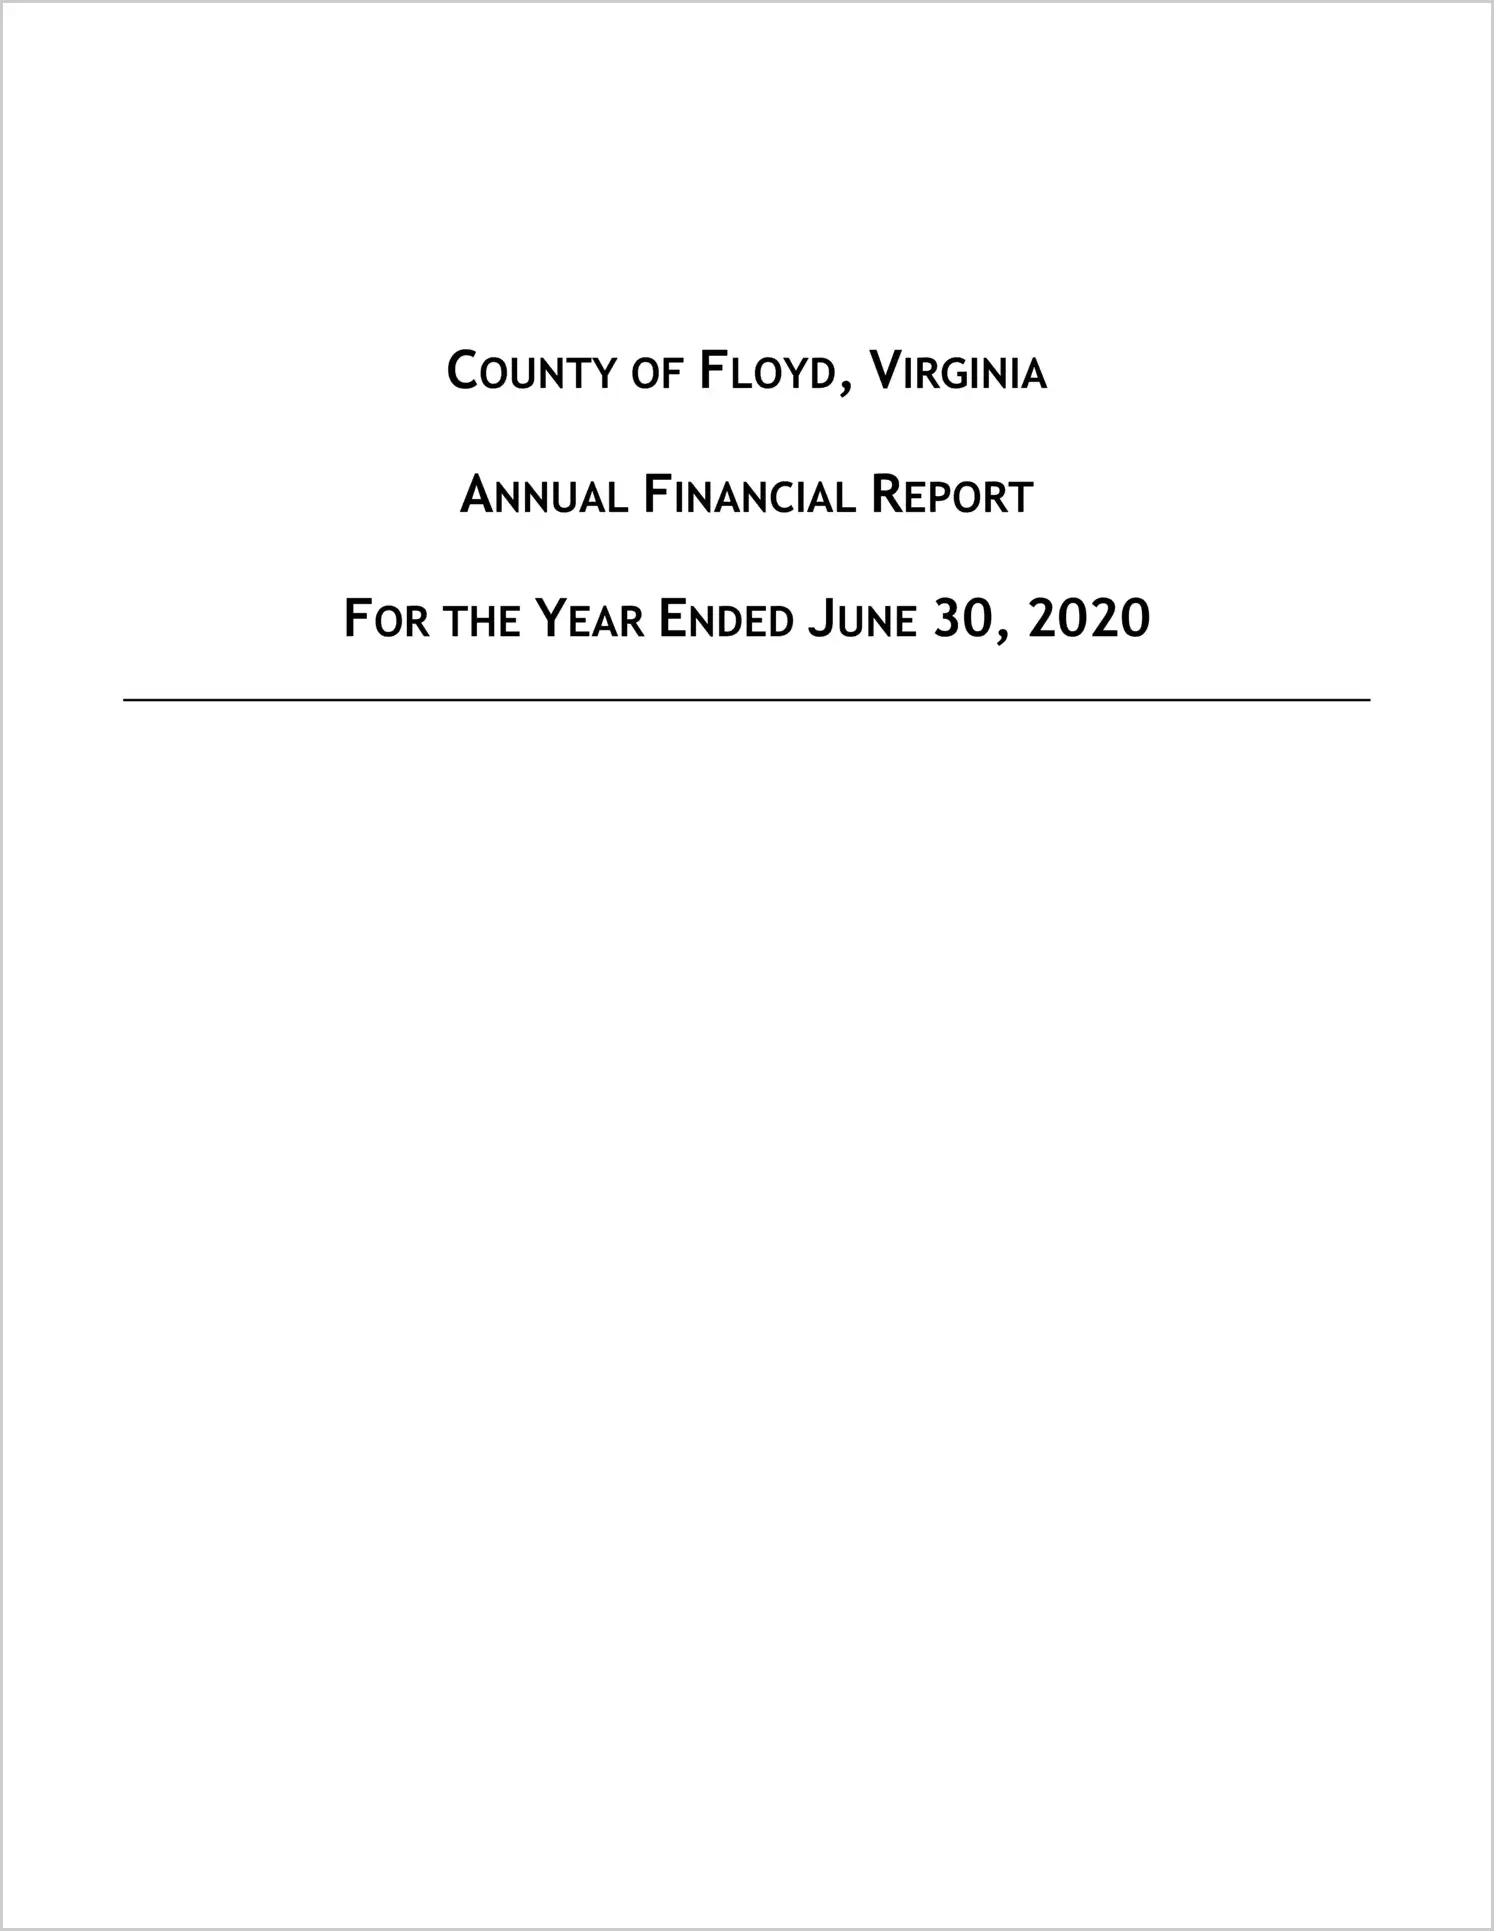 2020 Annual Financial Report for County of Floyd